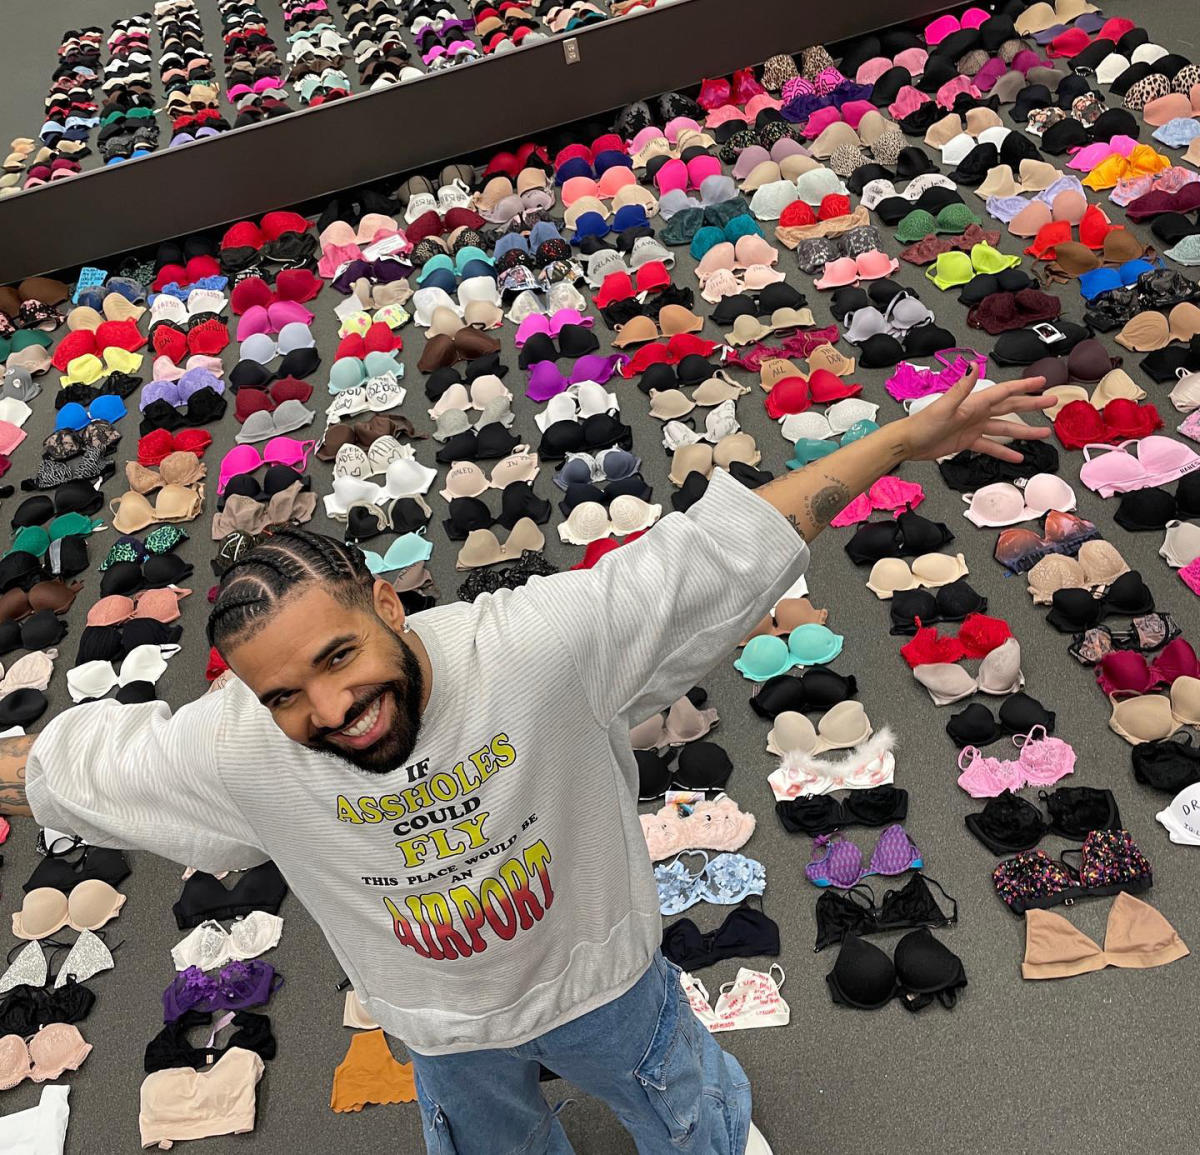 Drake Proudly Shows Off His Collection of More Than 100 Bras From Fans